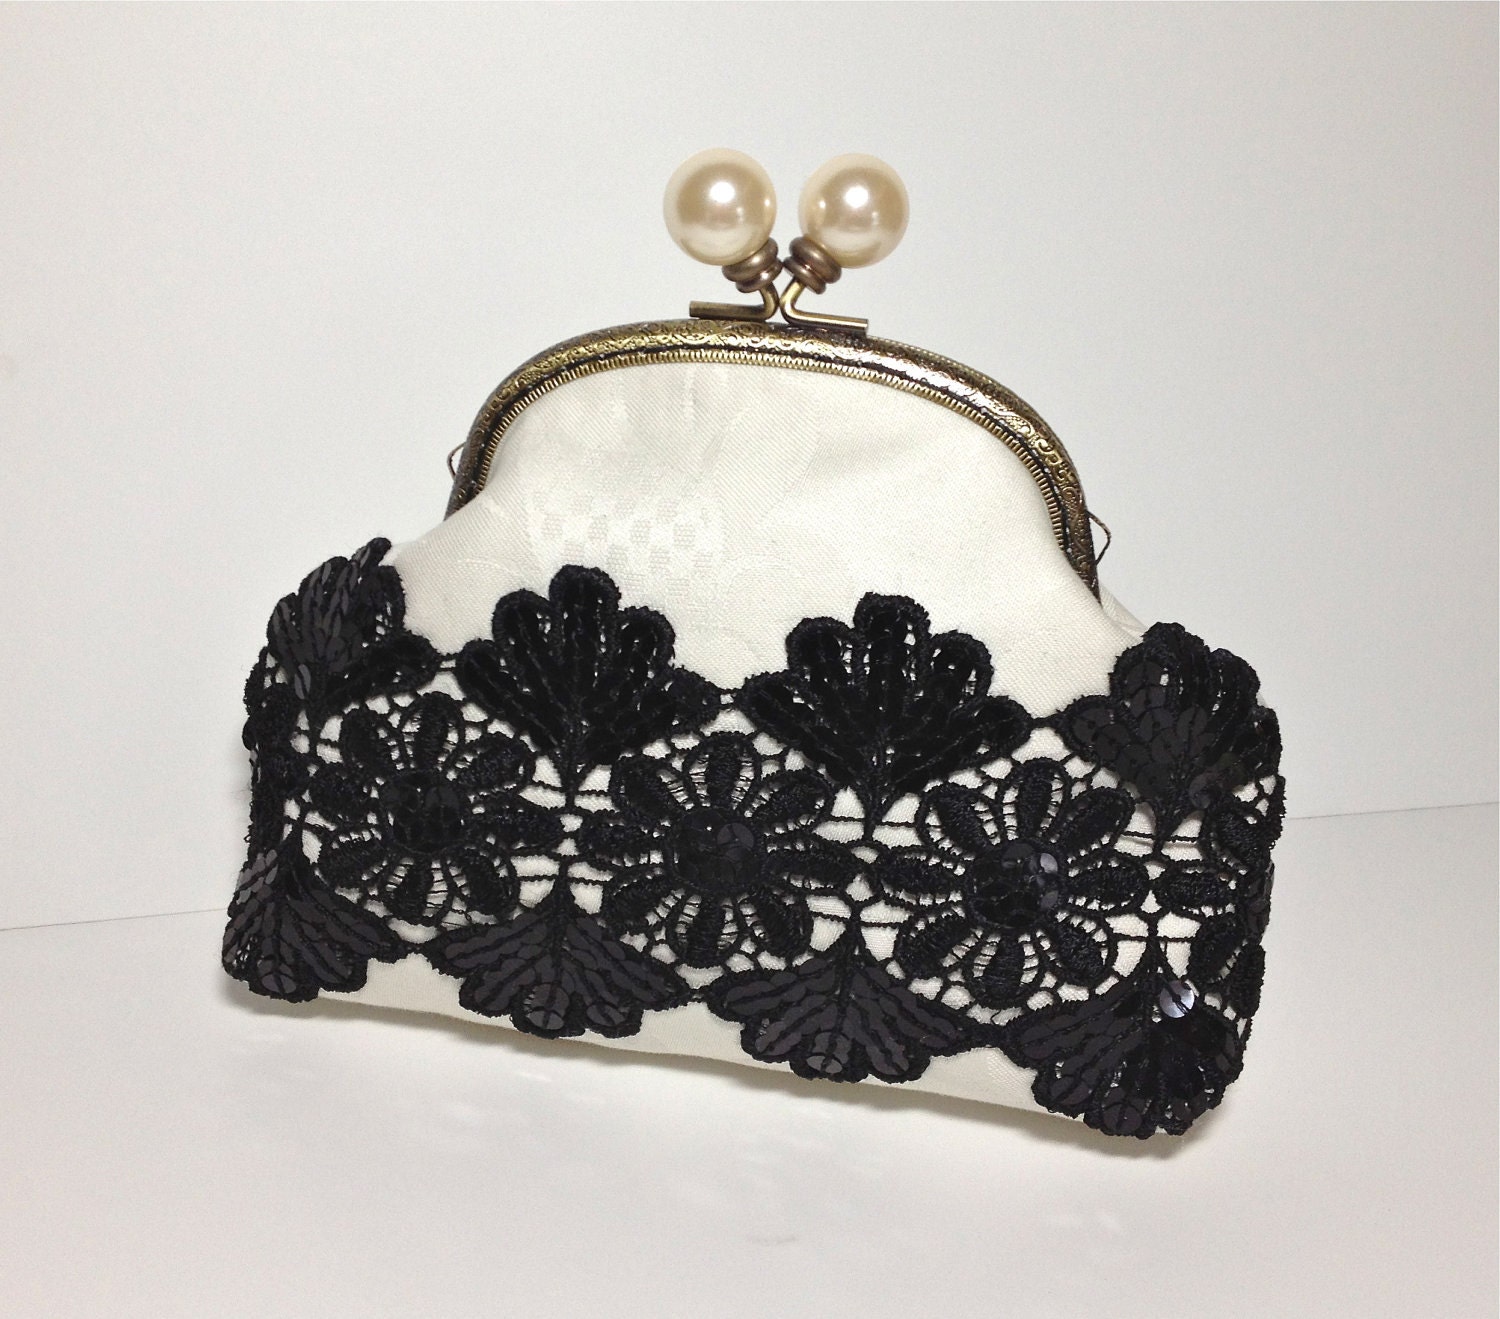 Cream-colored clutch with pearl enclosure and black lace